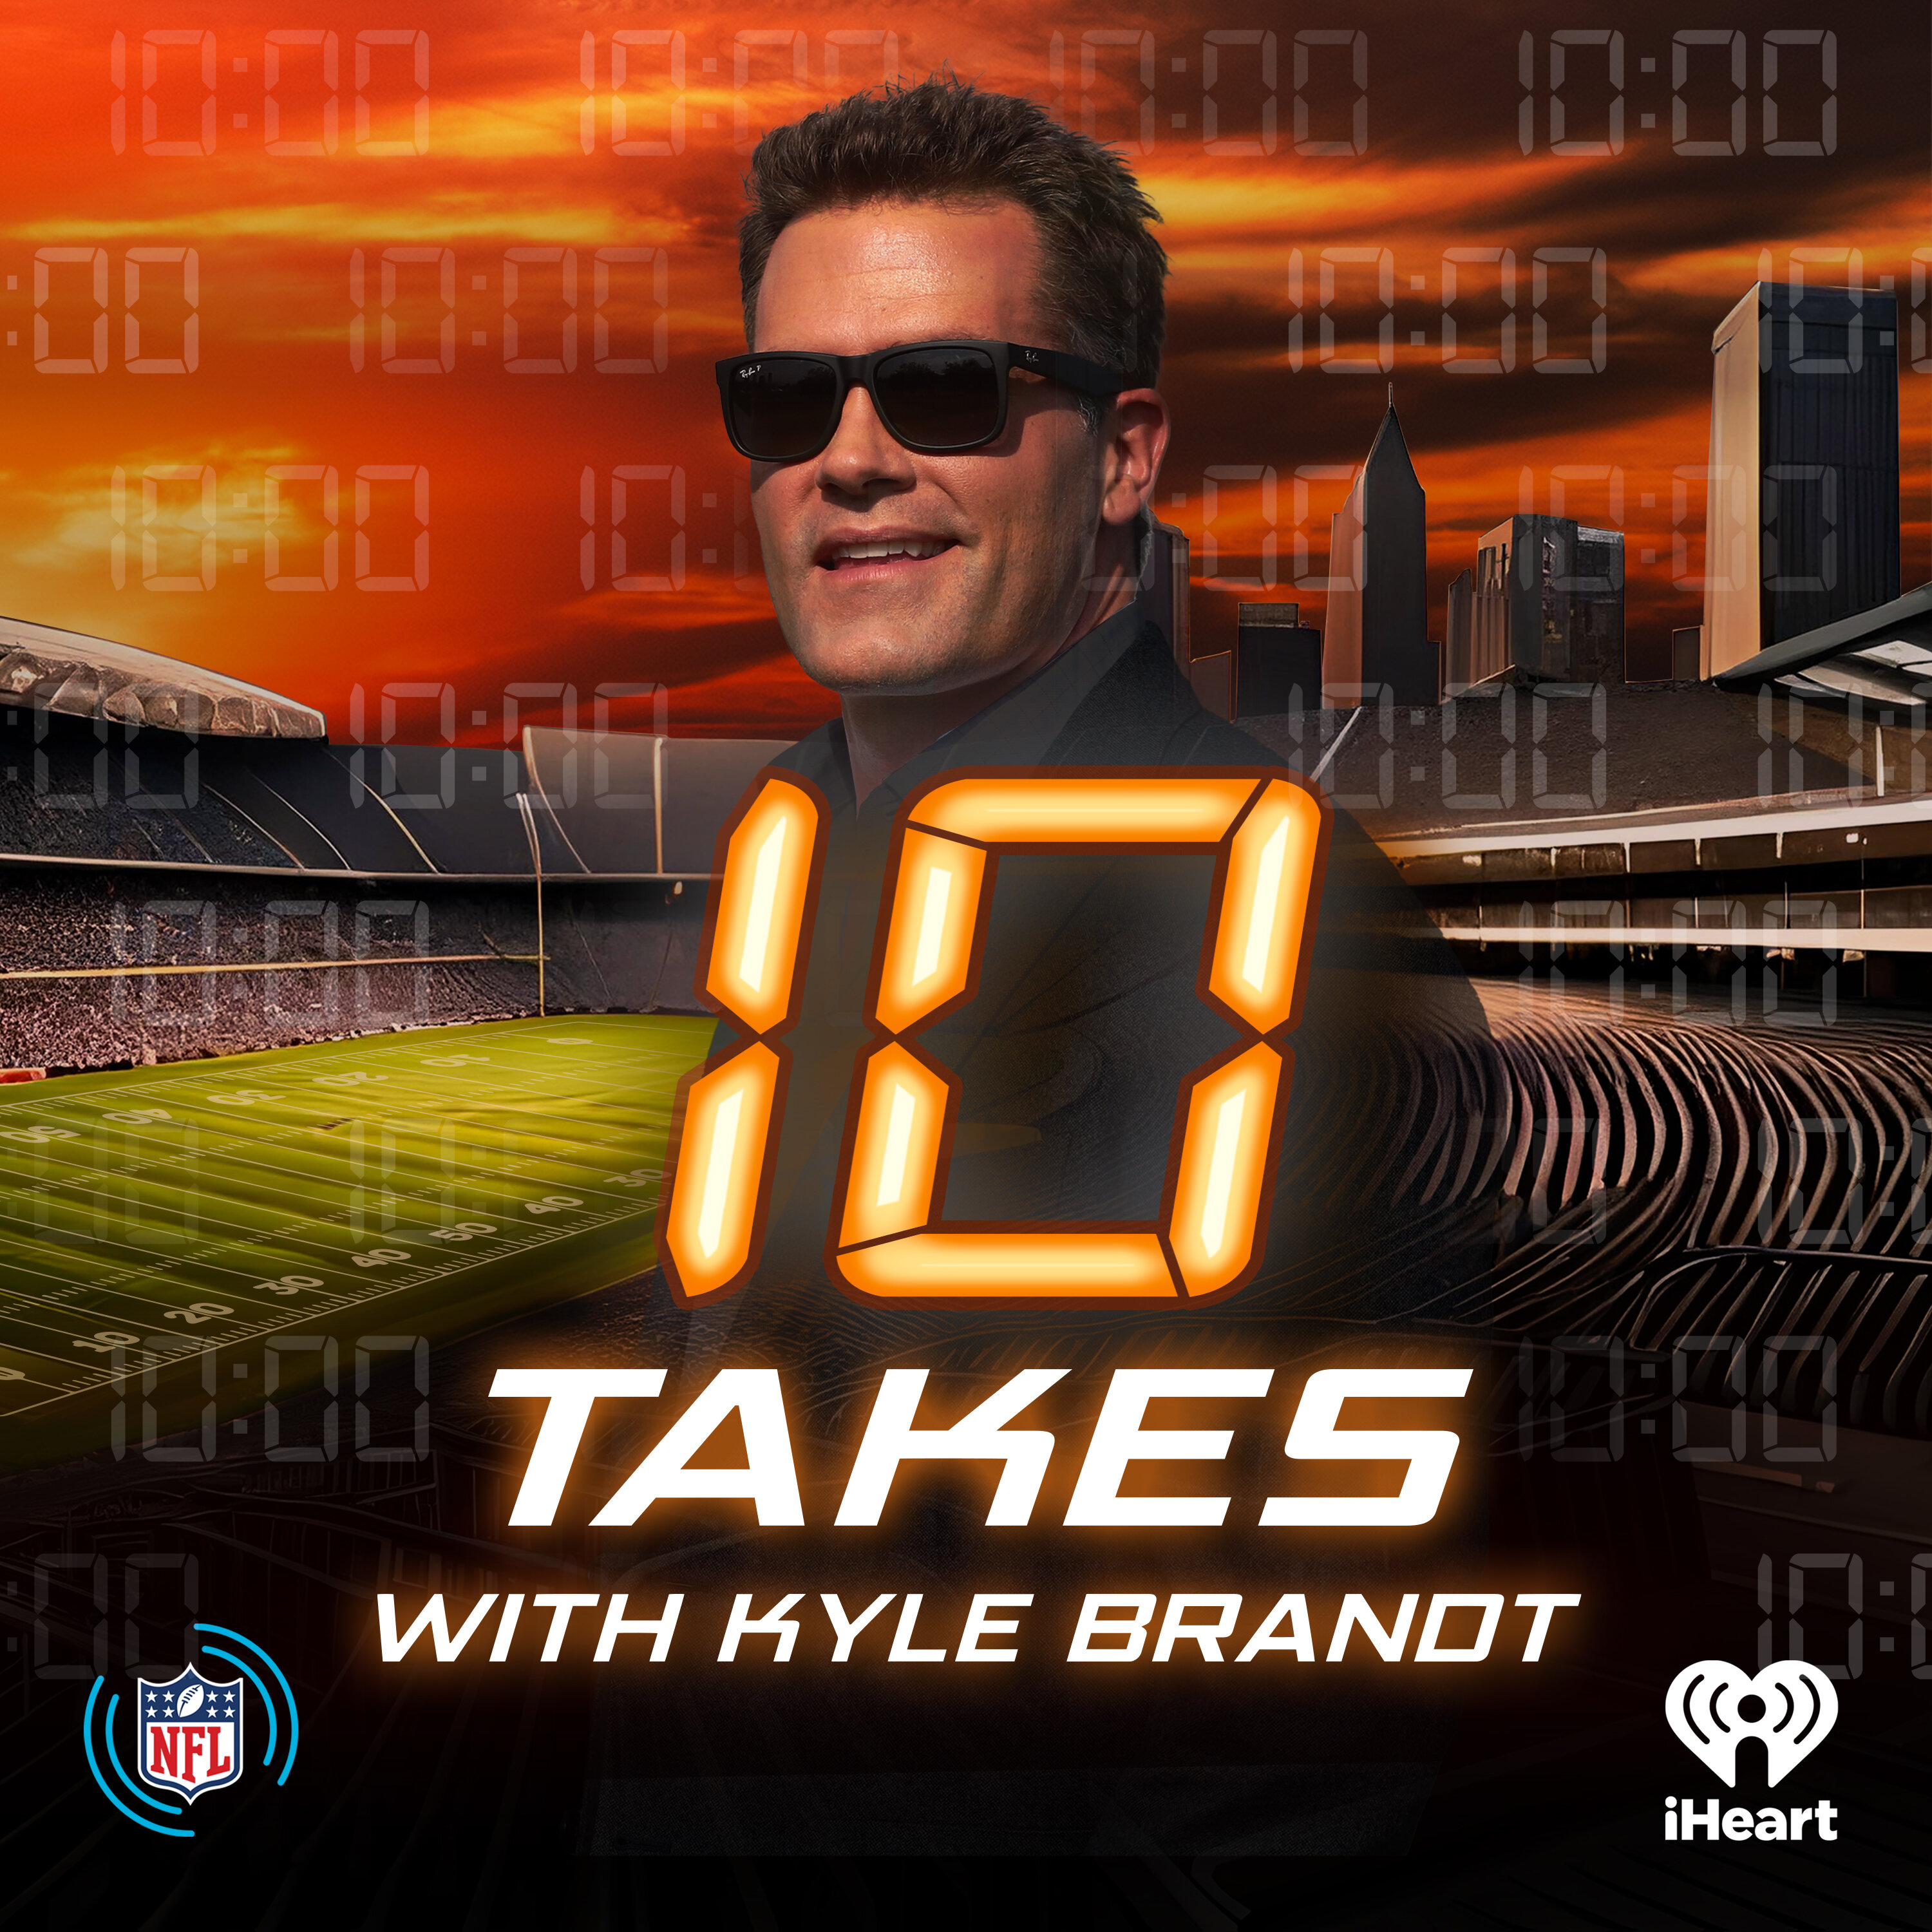 Introducing: 10 Takes with Kyle Brandt